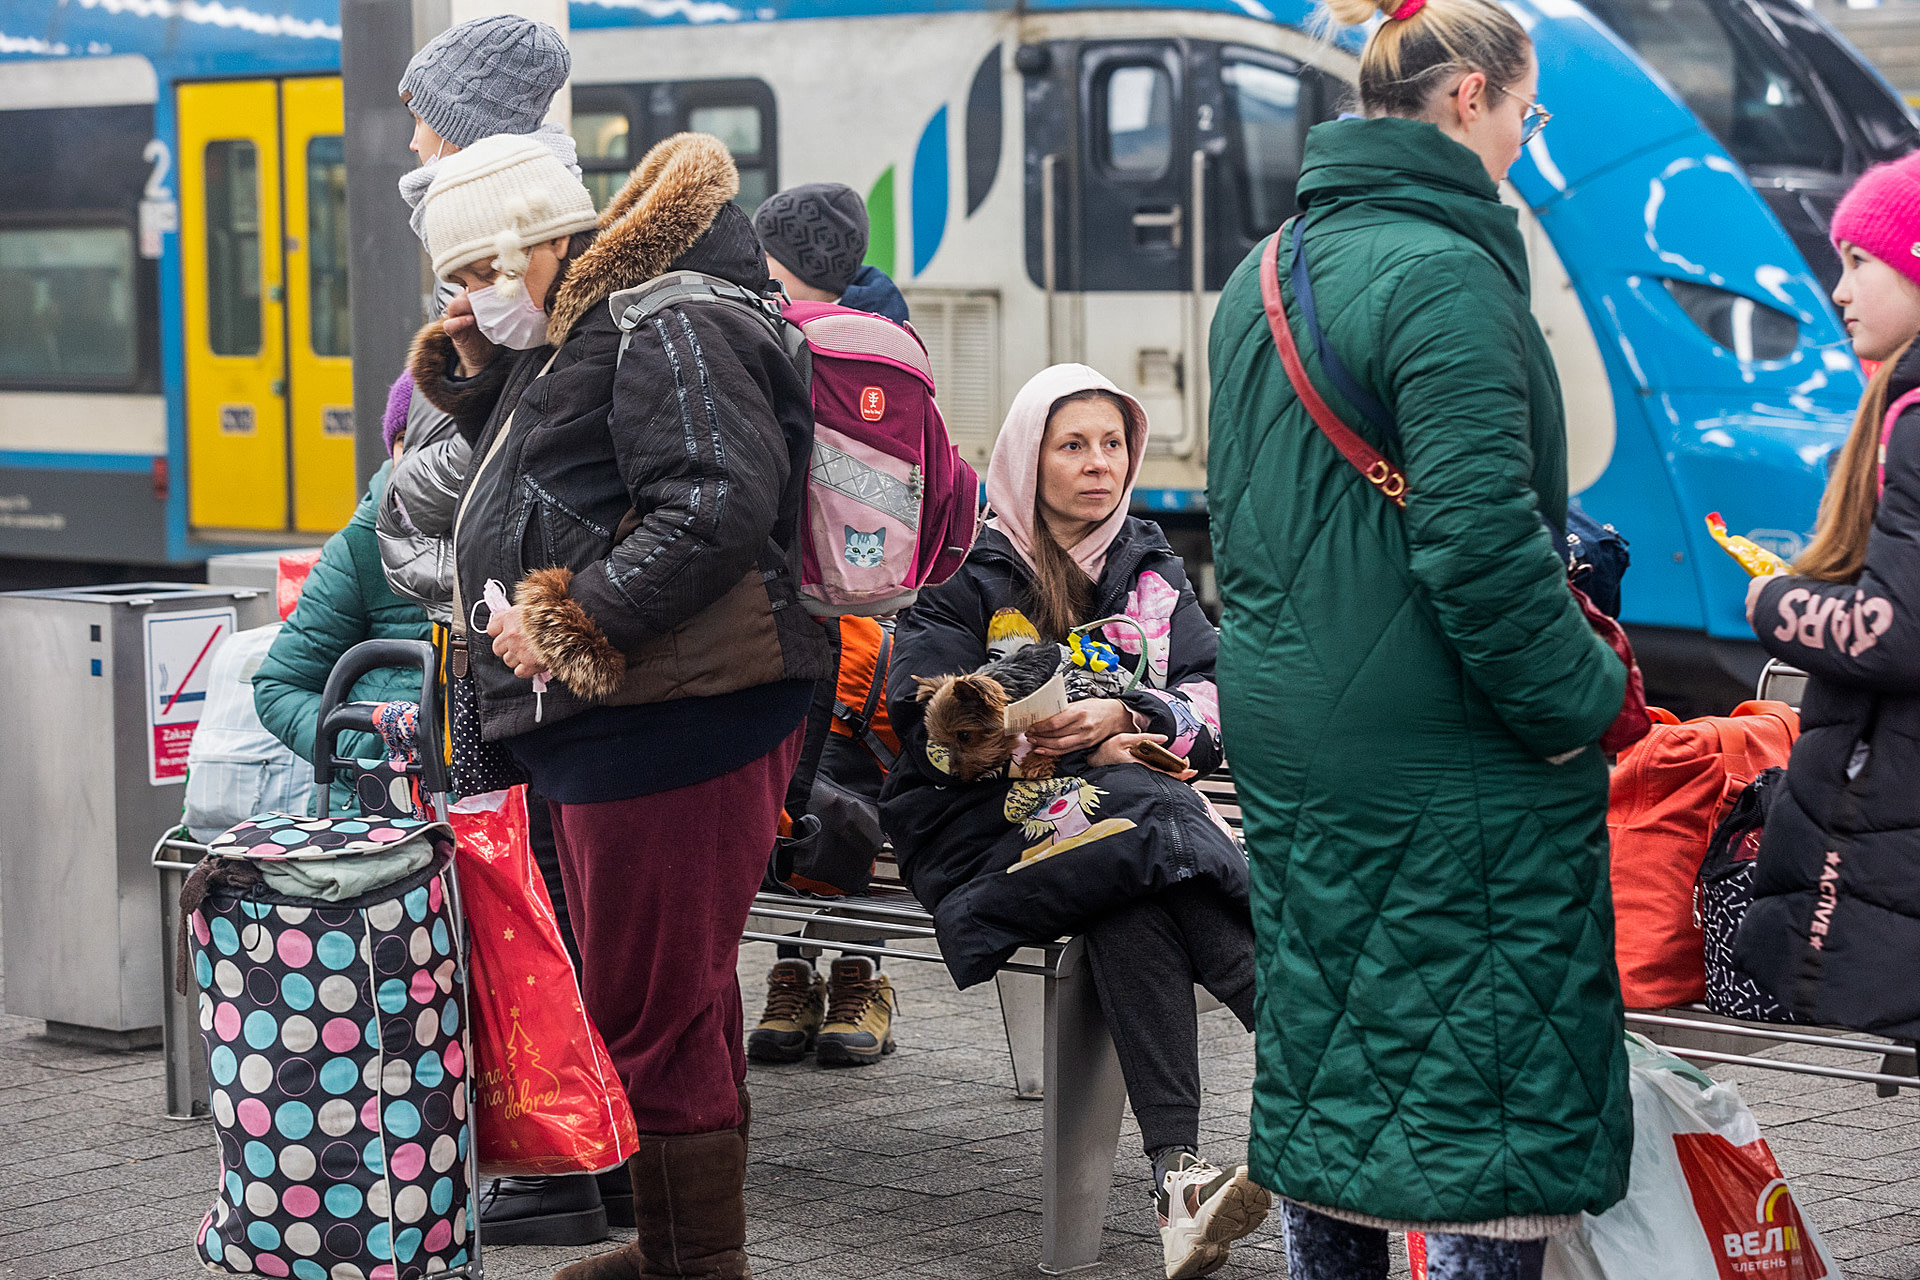 War refugees from Ukraine at the train station, waiting for a train to Poznan.